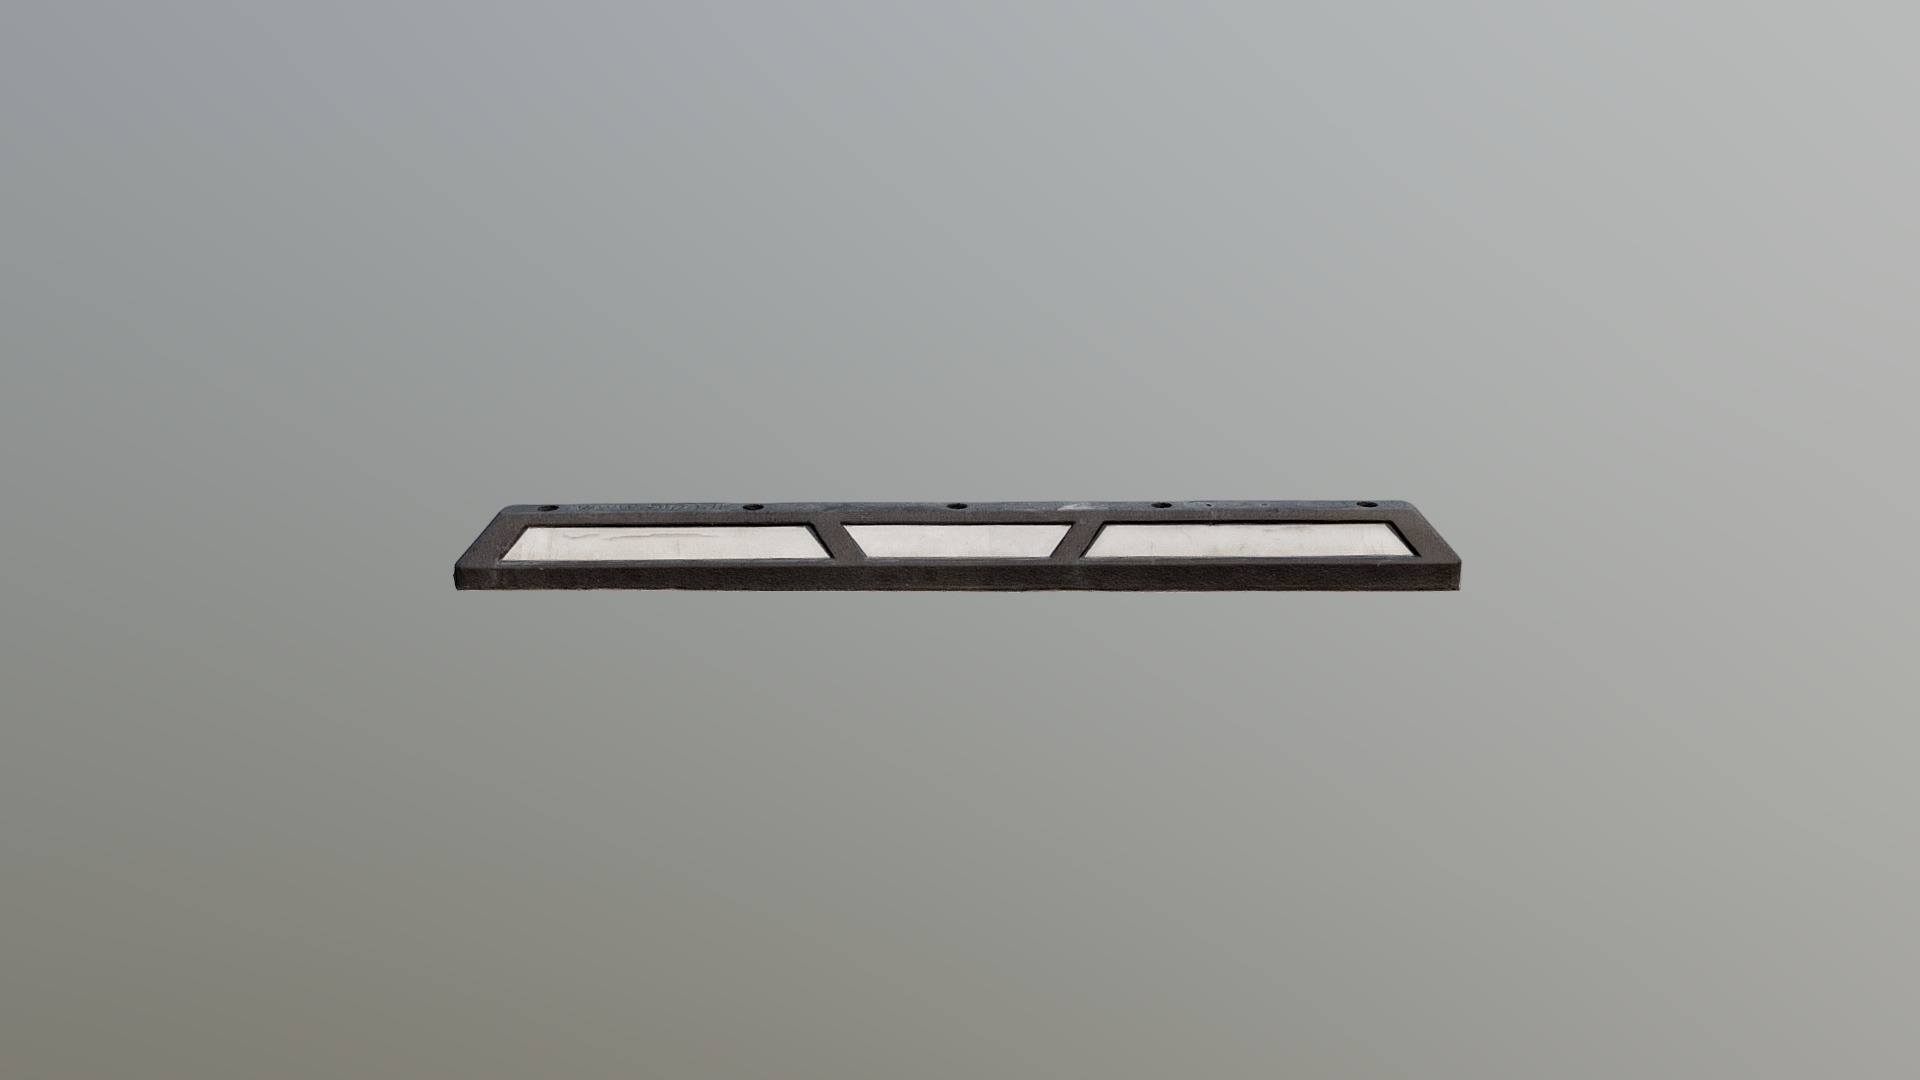 3D model Rubber Parking Curb Car Stop - This is a 3D model of the Rubber Parking Curb Car Stop. The 3D model is about a black rectangular object.